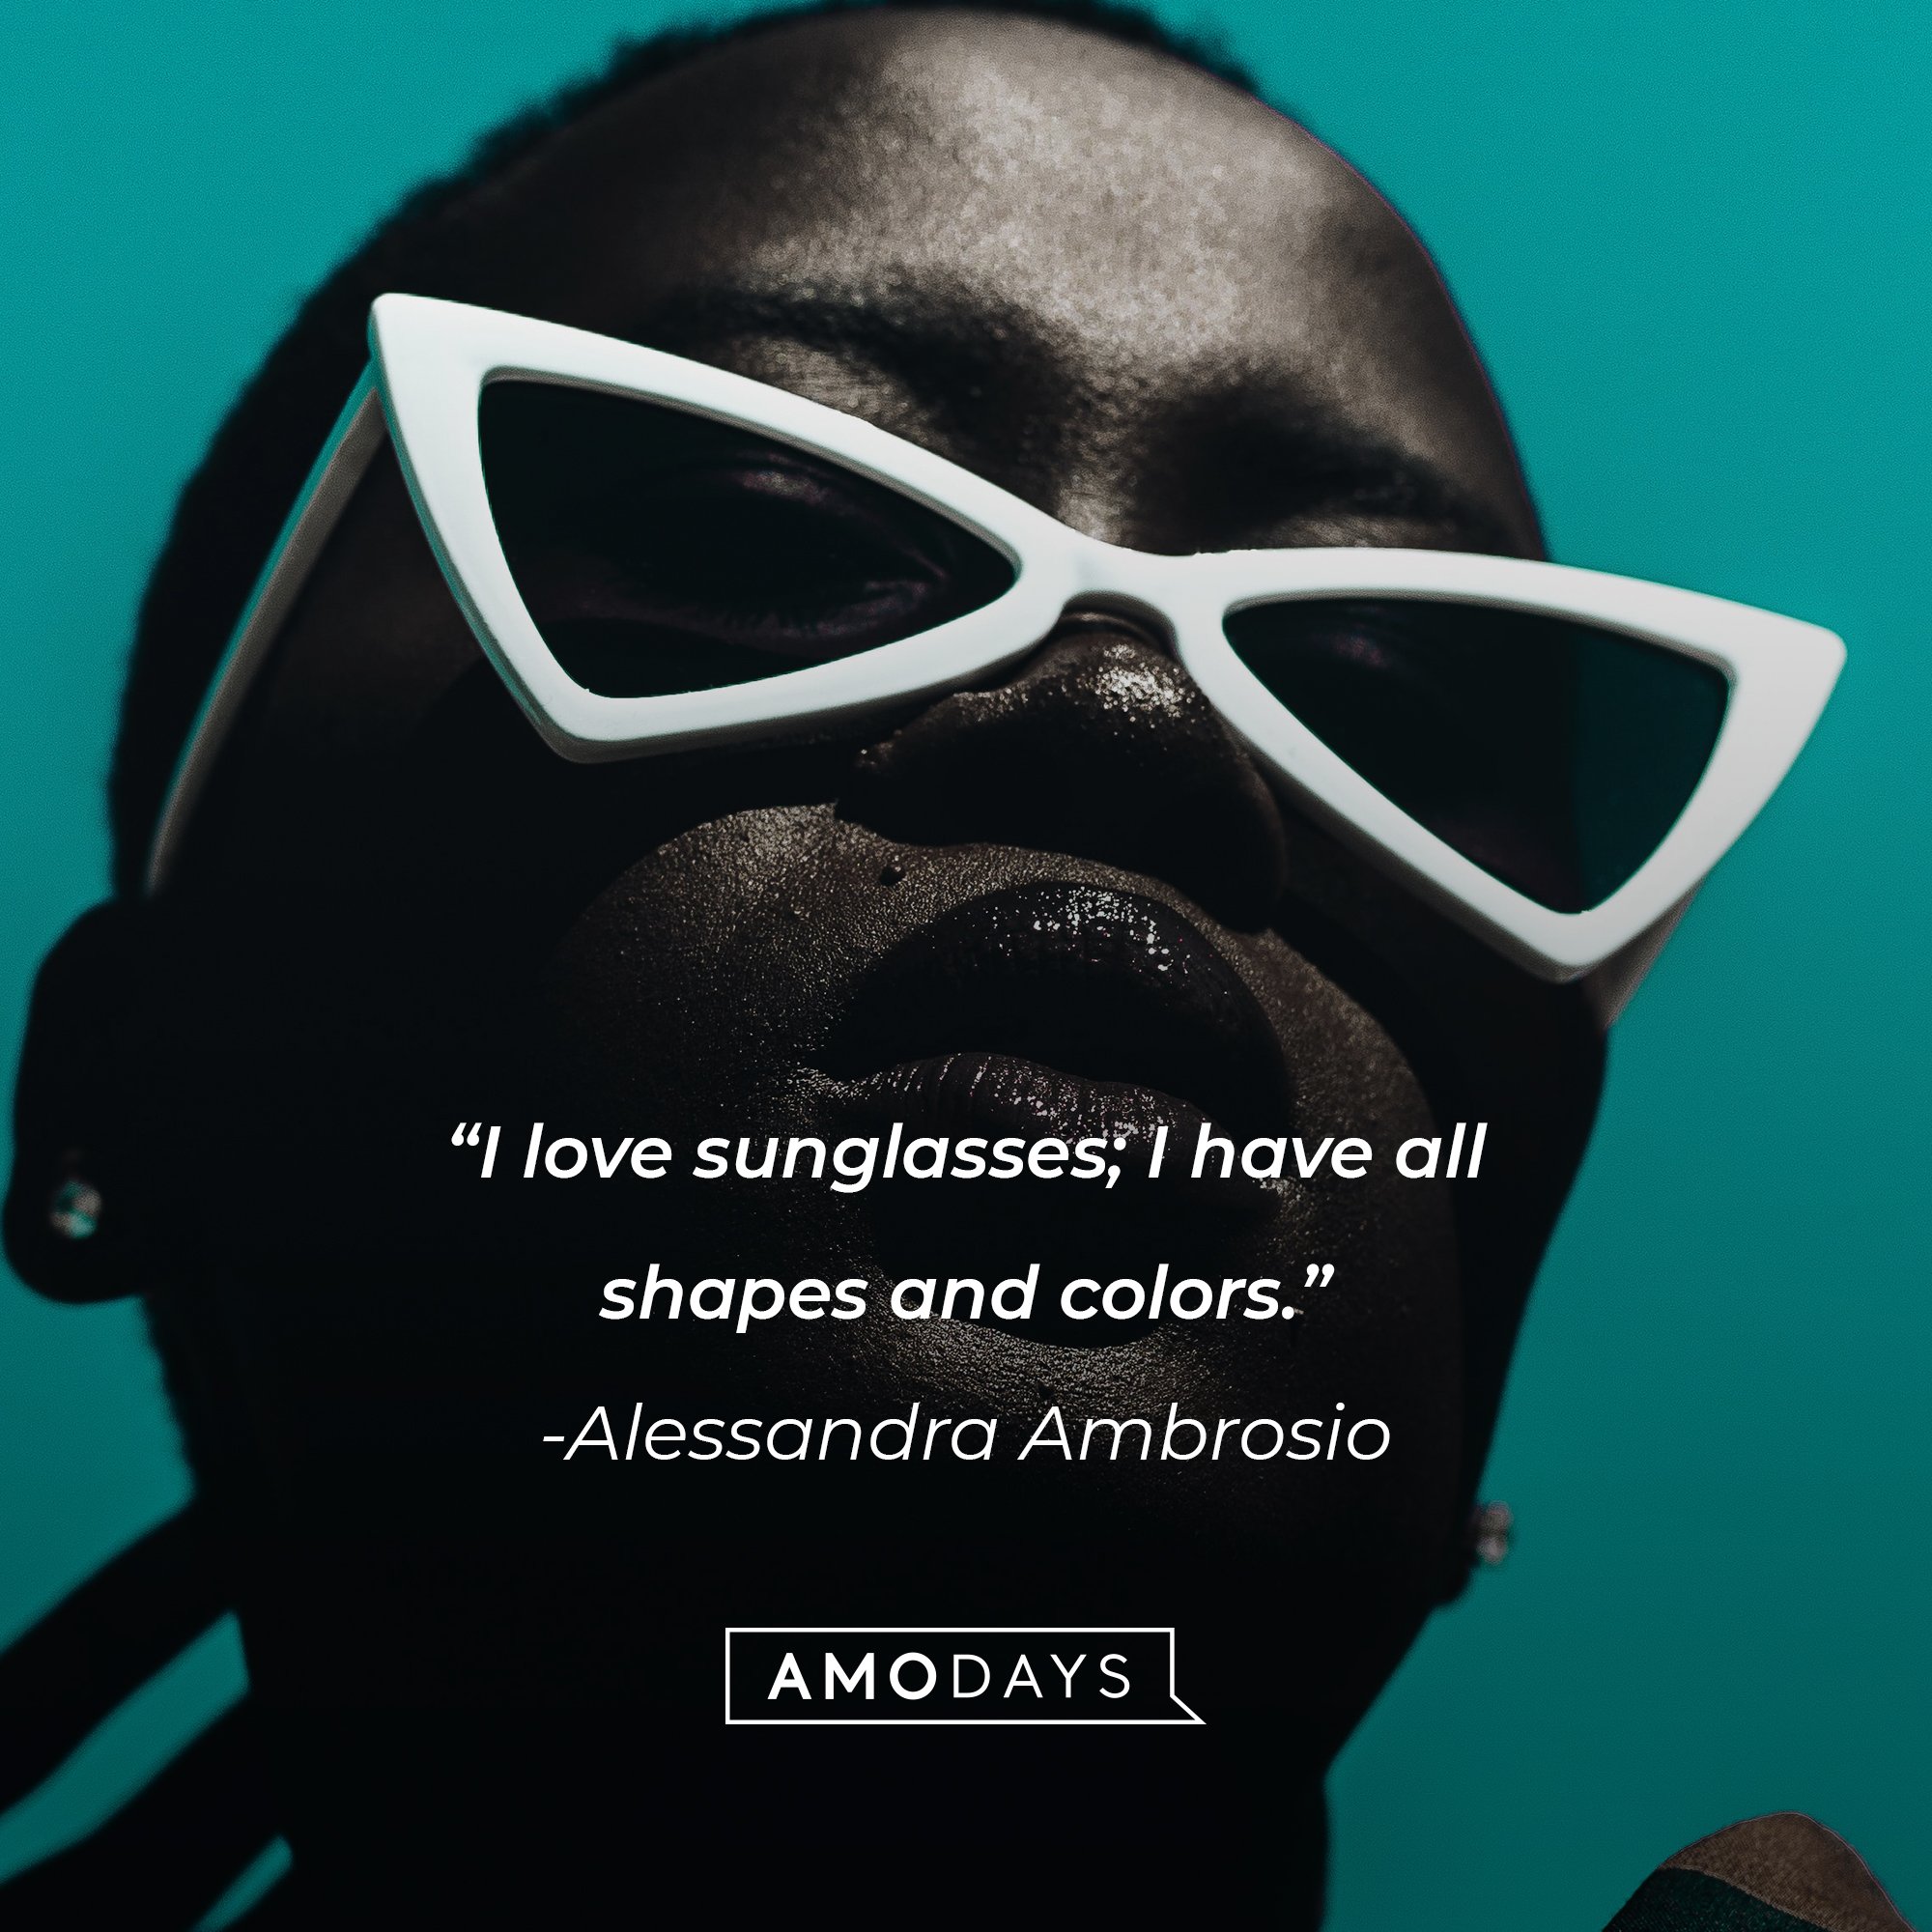 Alessandra Ambrosio’s quote: "I love sunglasses; I have all shapes and colors." | Image: AmoDays 